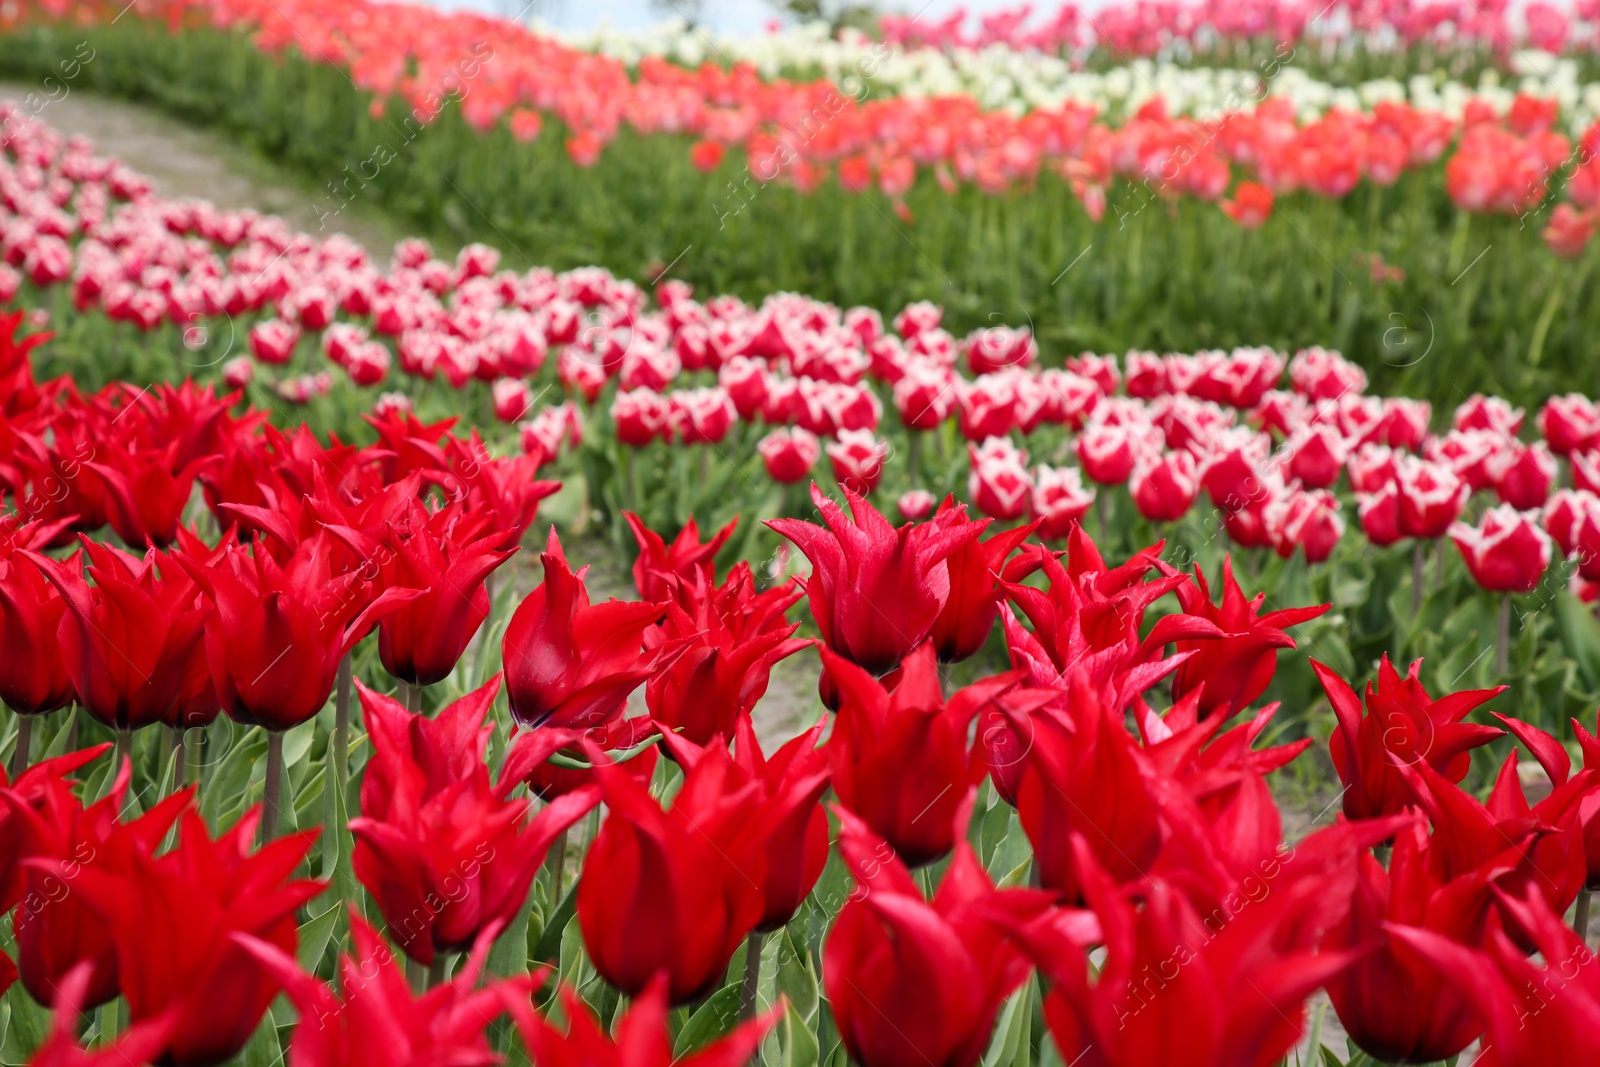 Photo of Beautiful red tulip flowers growing in field